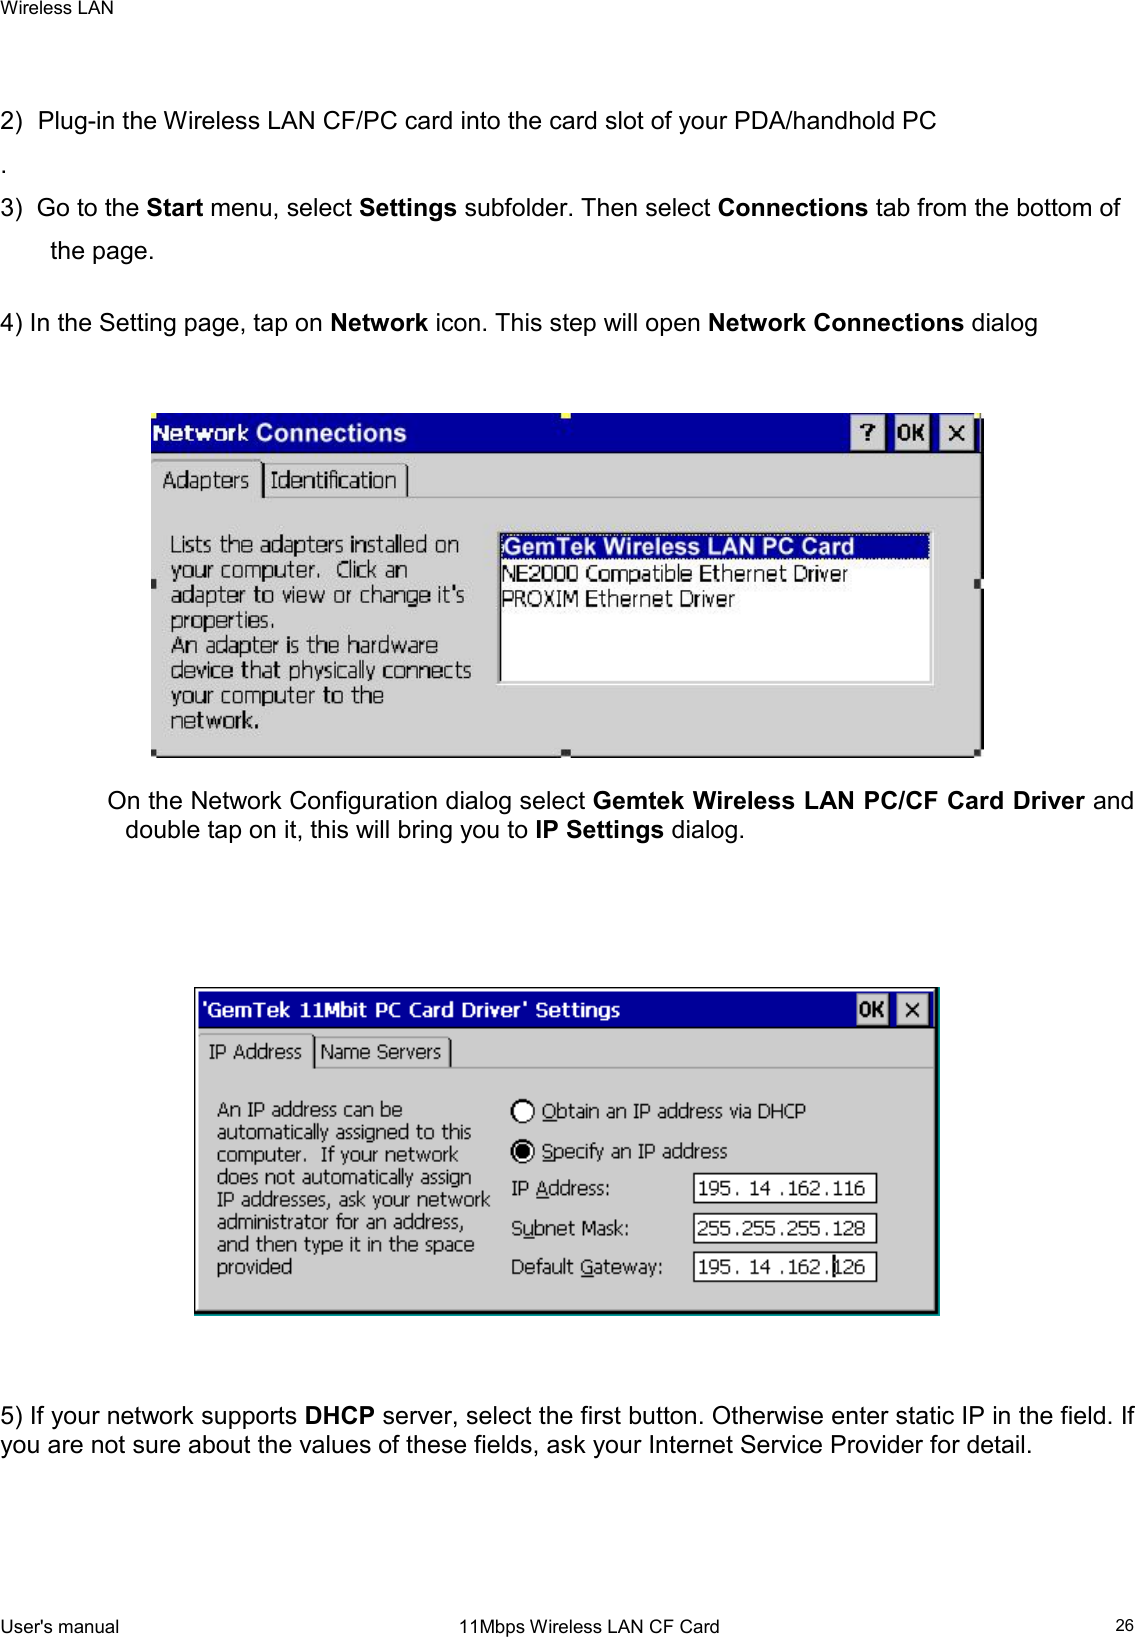 Wireless LAN  User&apos;s manual                                                                 11Mbps Wireless LAN CF Card   26  2)  Plug-in the Wireless LAN CF/PC card into the card slot of your PDA/handhold PC  . 3)  Go to the Start menu, select Settings subfolder. Then select Connections tab from the bottom of the page.   4) In the Setting page, tap on Network icon. This step will open Network Connections dialog       On the Network Configuration dialog select Gemtek Wireless LAN PC/CF Card Driver and double tap on it, this will bring you to IP Settings dialog.          5) If your network supports DHCP server, select the first button. Otherwise enter static IP in the field. If you are not sure about the values of these fields, ask your Internet Service Provider for detail.       